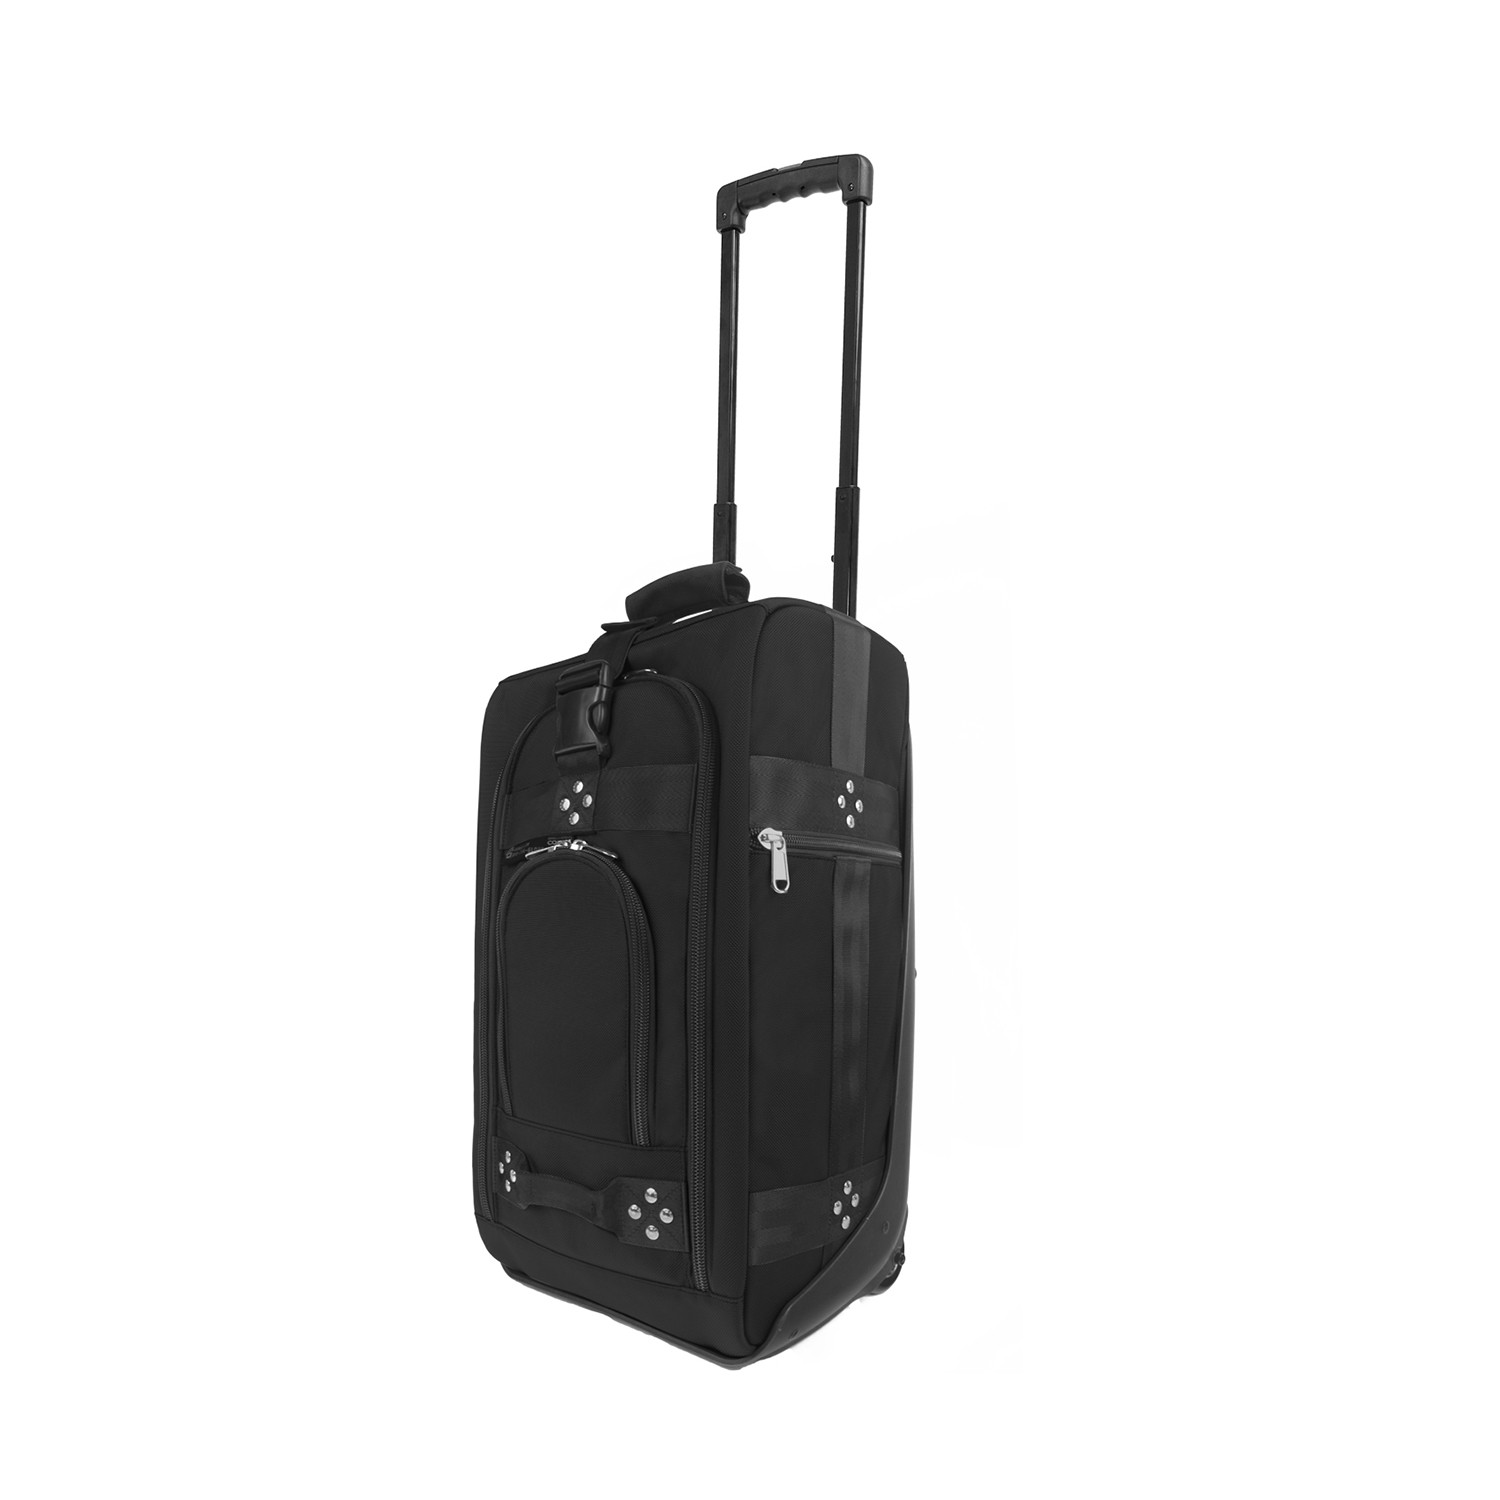 Carry-On + Patented Train Reaction Strap (Black) - TRS Ballistic ...